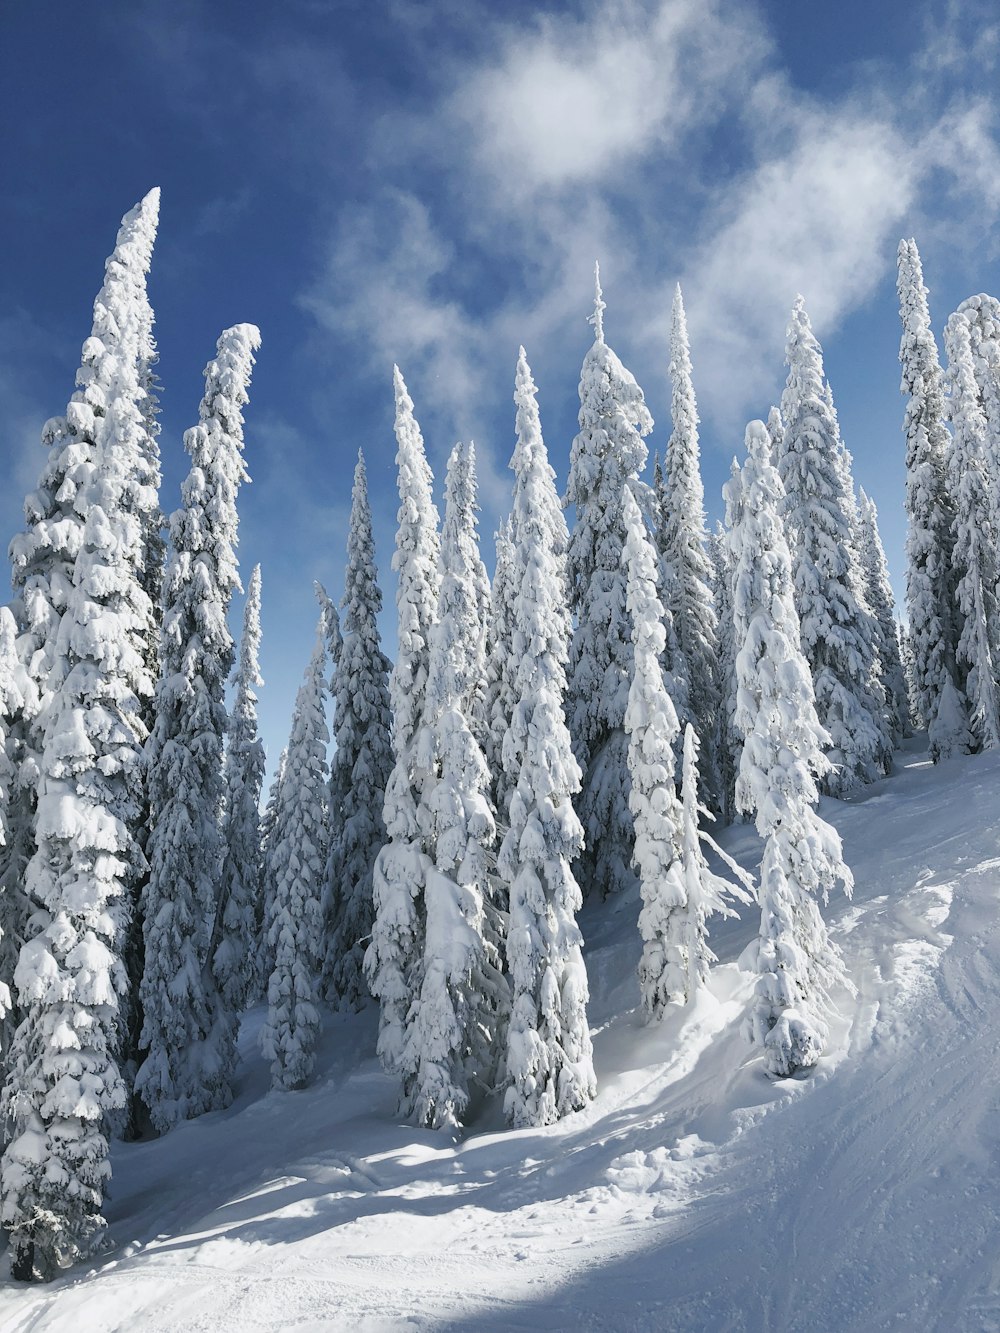 snow covered trees under white clouds and blue sky during daytime